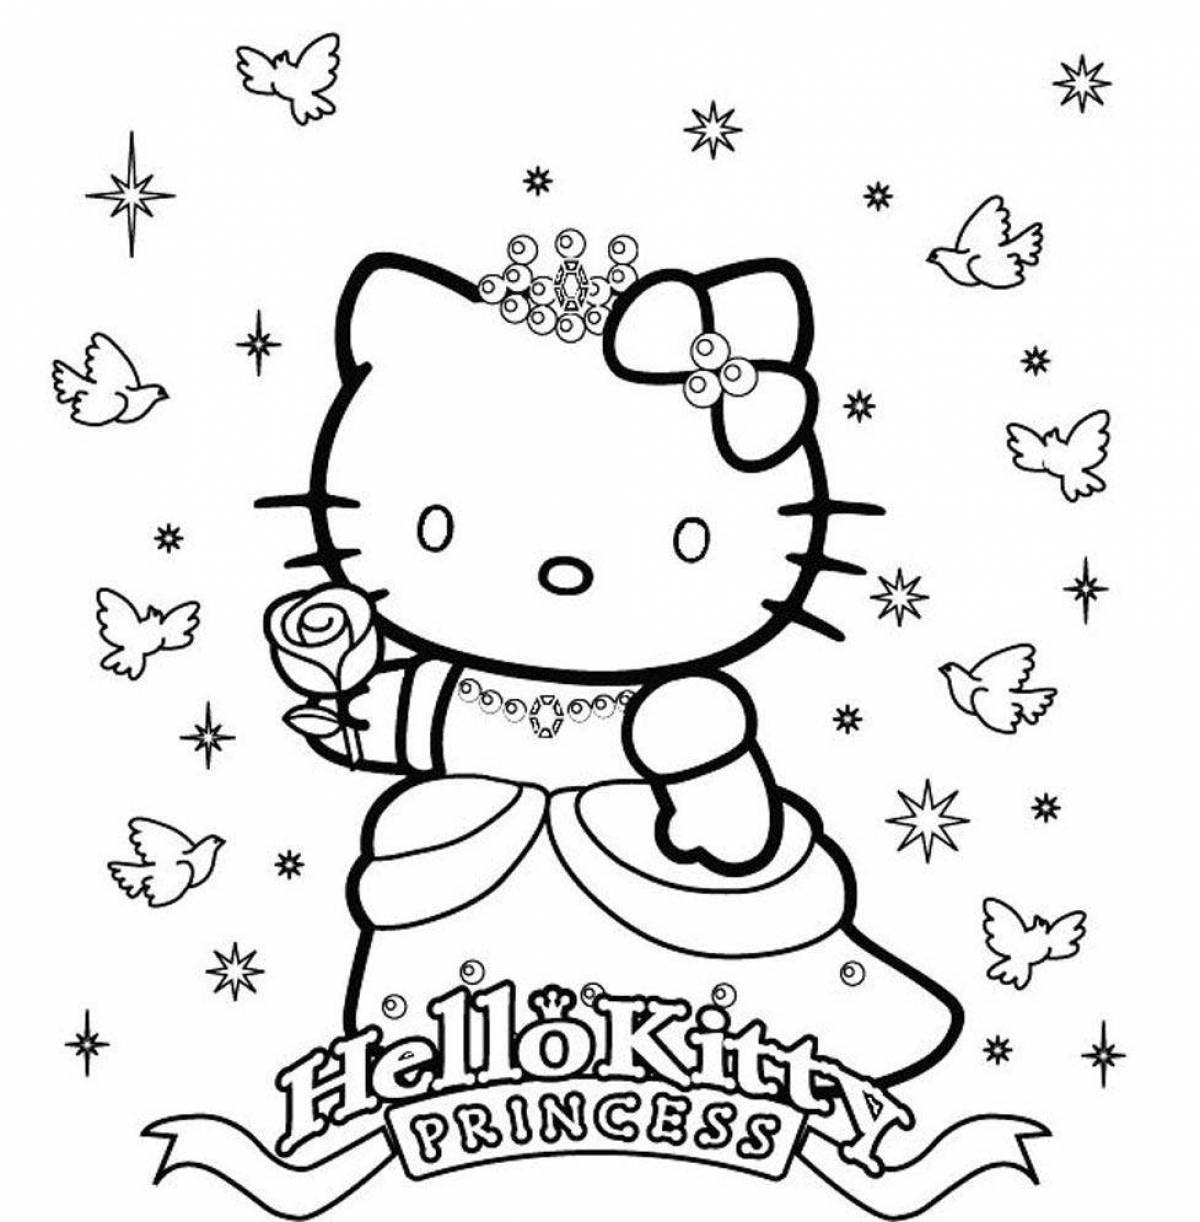 Kitty cat live coloring